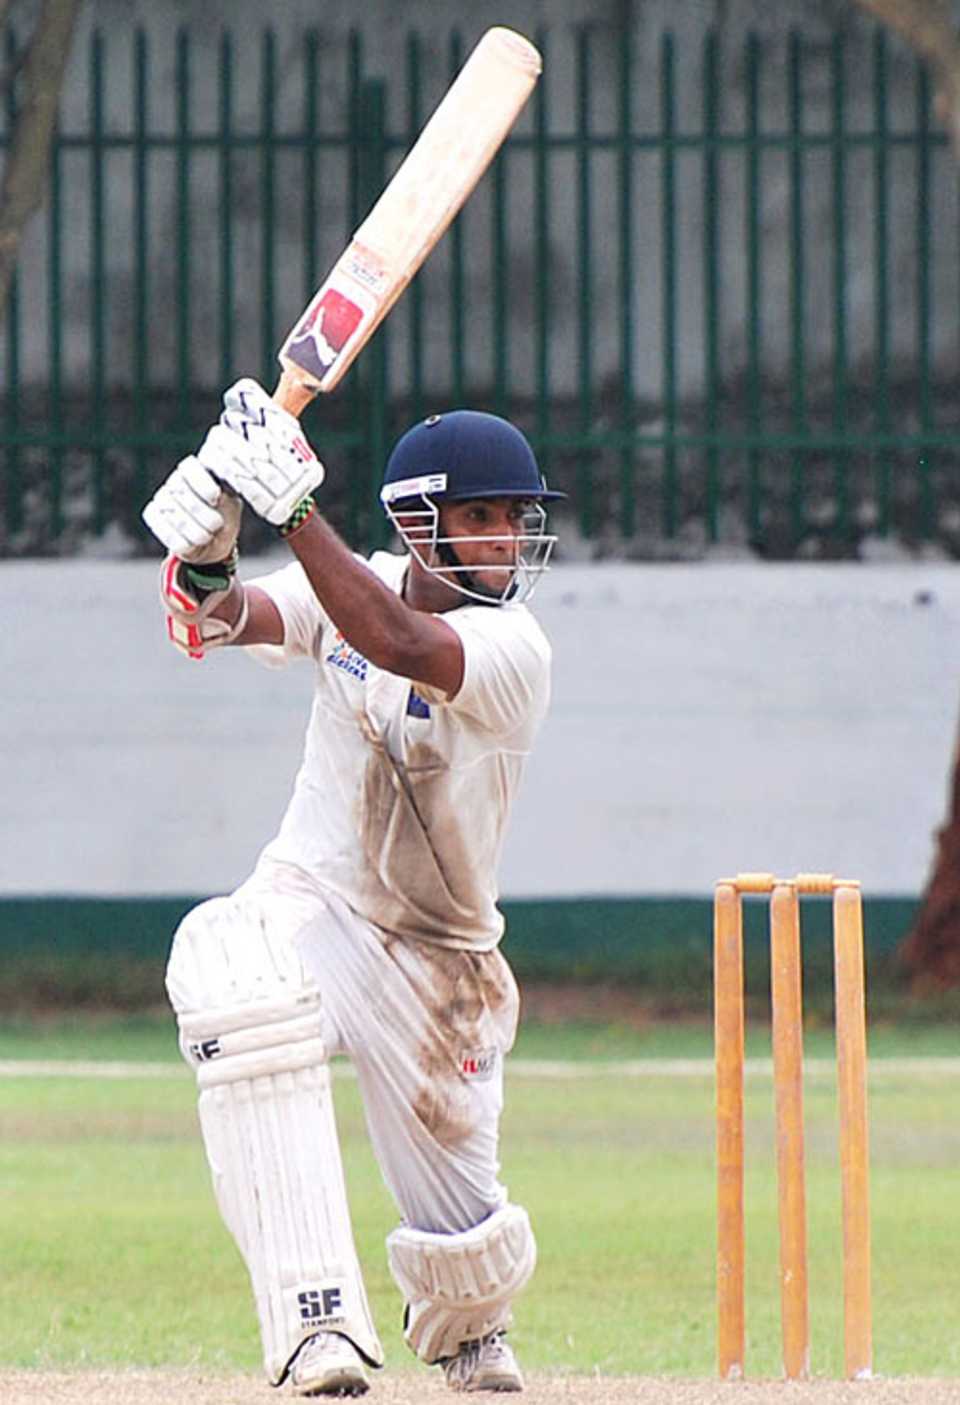 Geeth Alwis drives through the off side during his century, Wayamba v Ruhuna, Inter-provincial tournament, Colombo, Apr 3-6, 2010